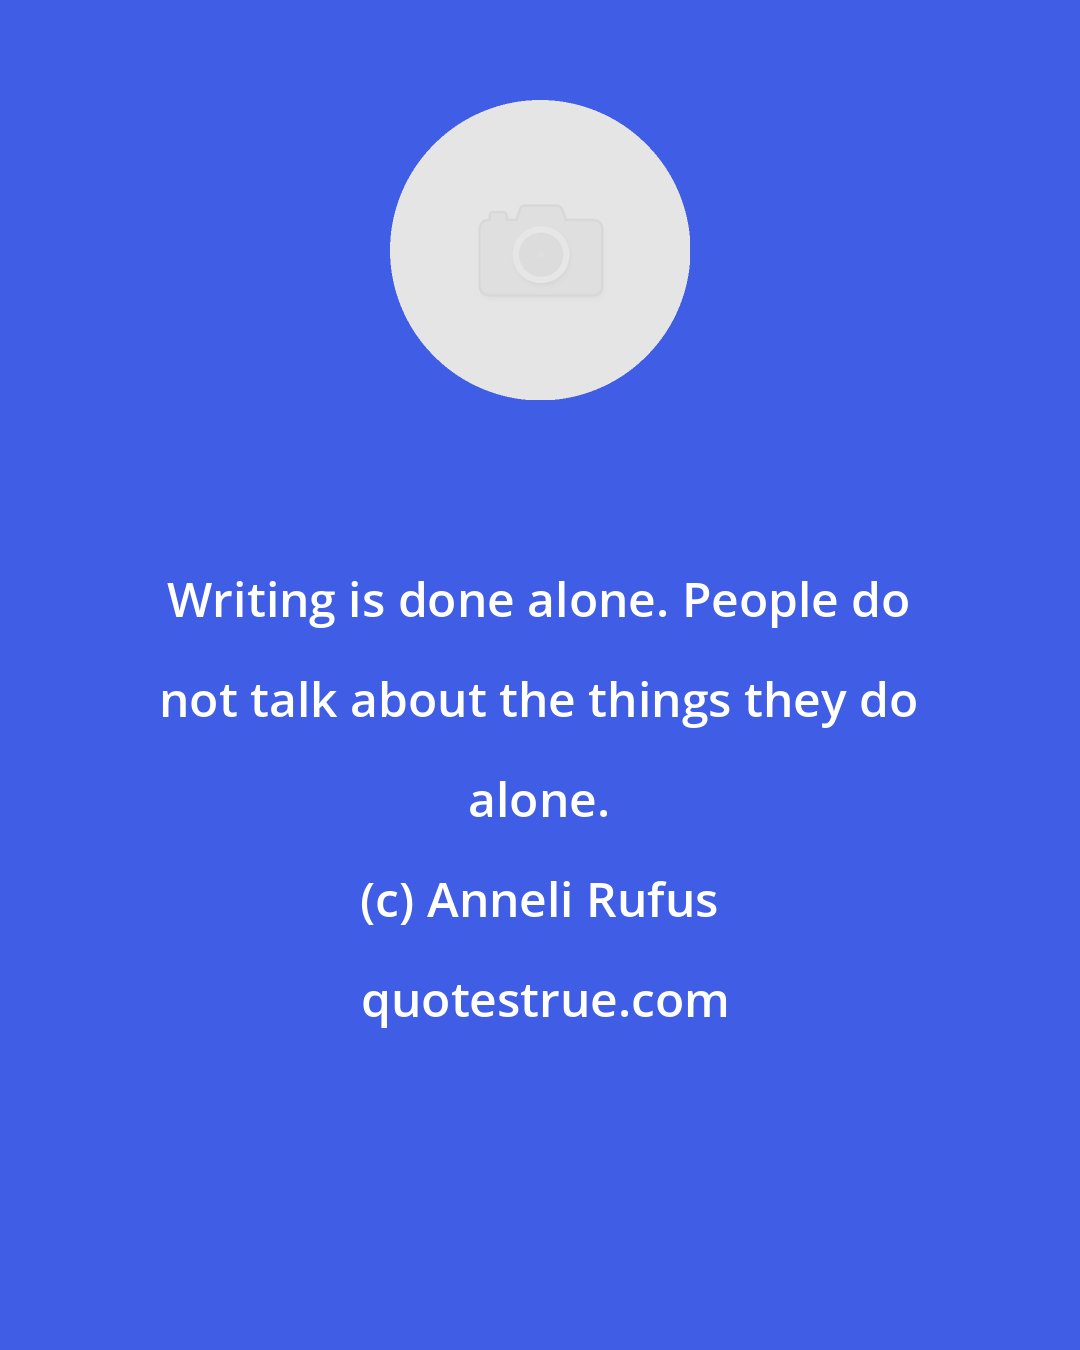 Anneli Rufus: Writing is done alone. People do not talk about the things they do alone.